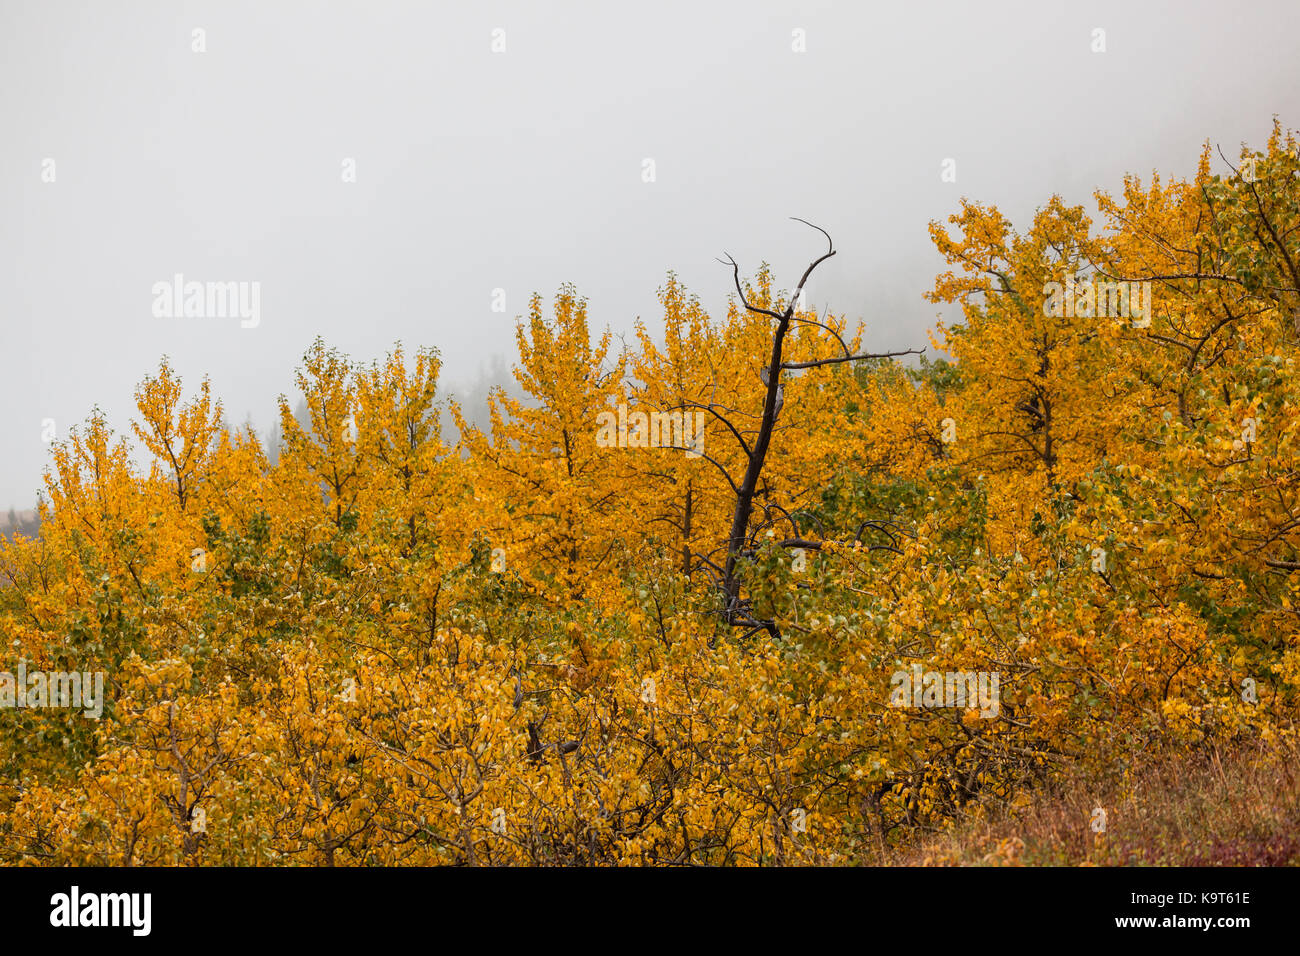 A dark skeleton of a tree stands among fall foliage of gold and green leaves with grey fog creeping up in the background. Stock Photo